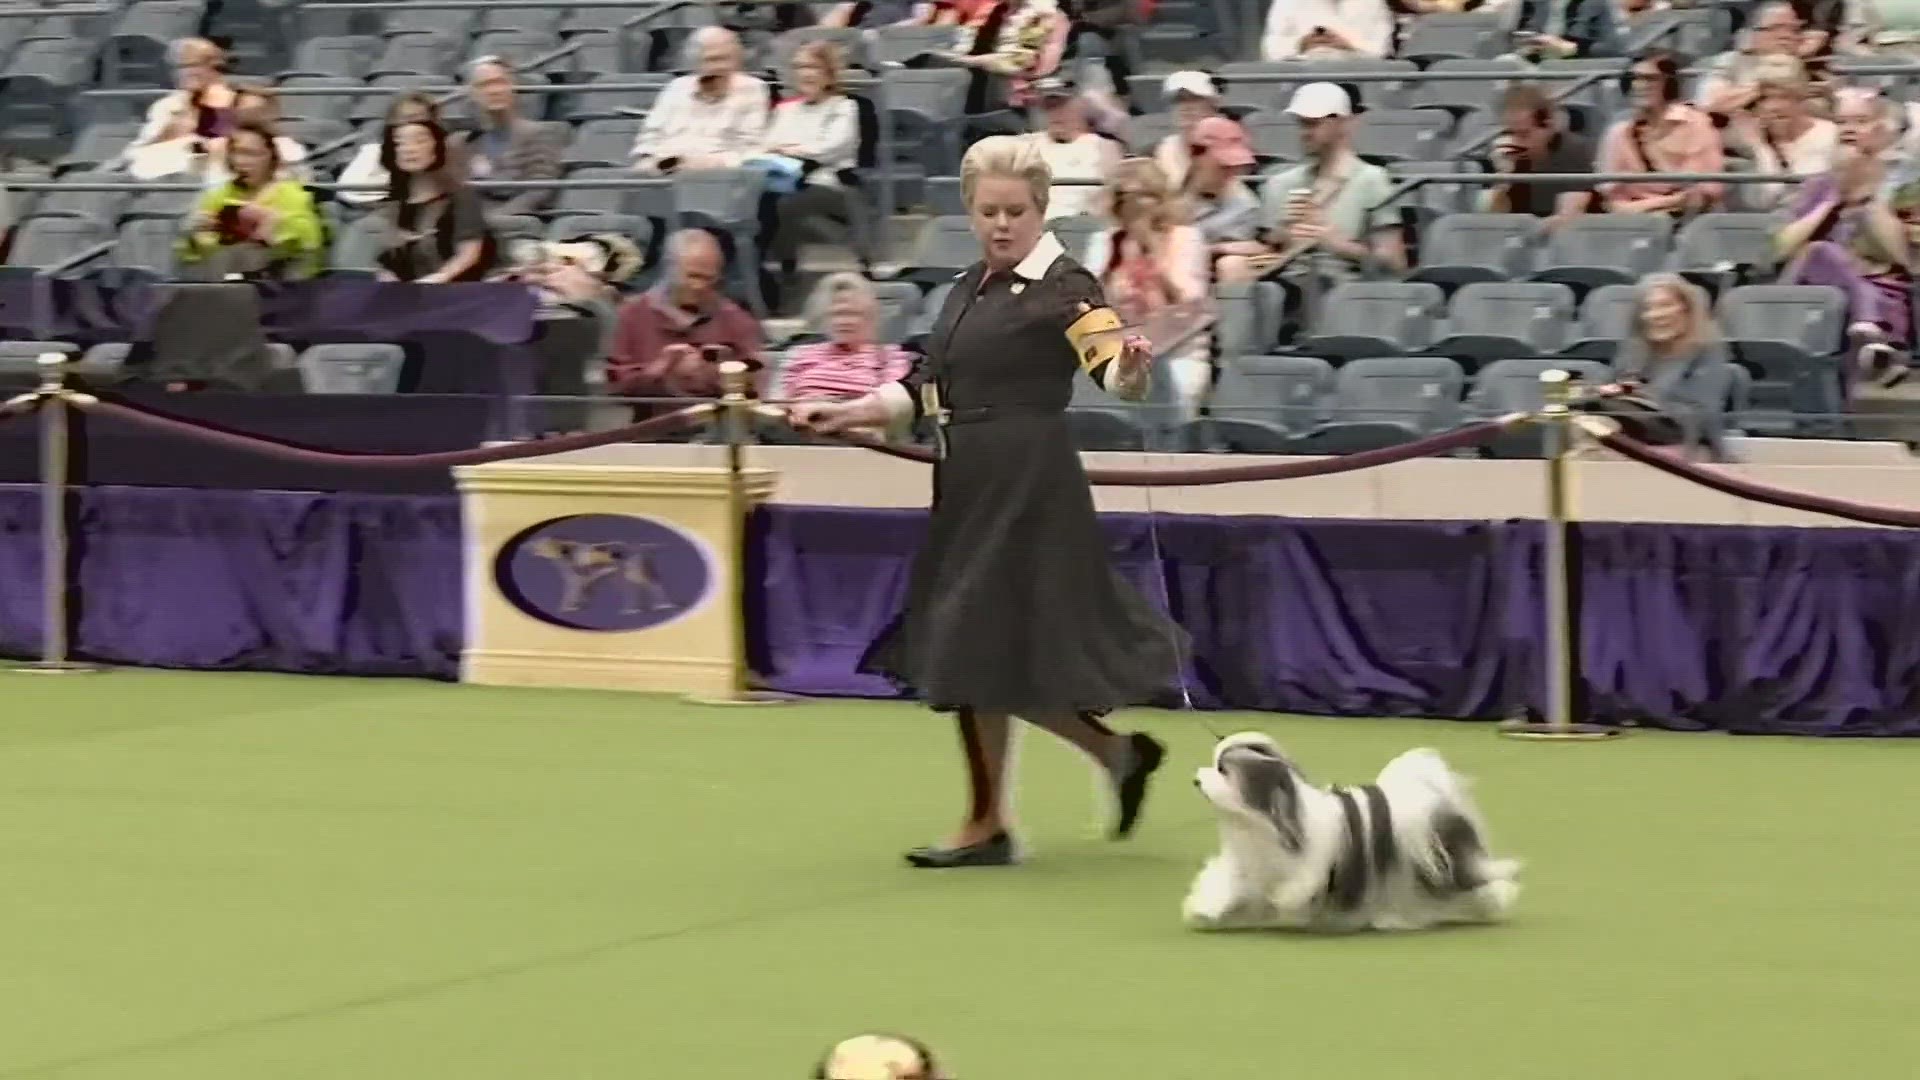 Where Can I Watch The Westminster Dog Show